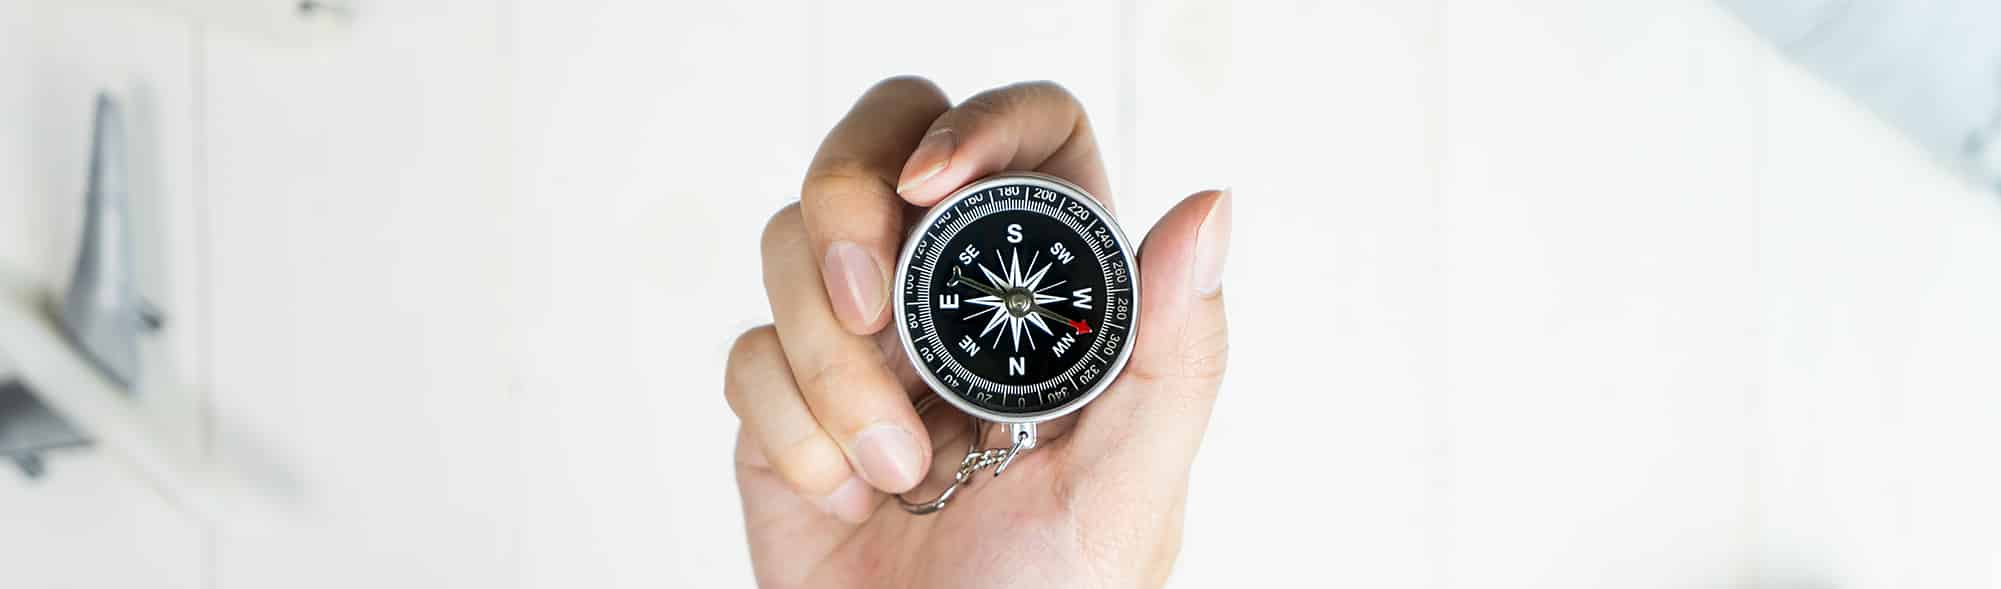 Explorer holding compass surrounded by travel accessories